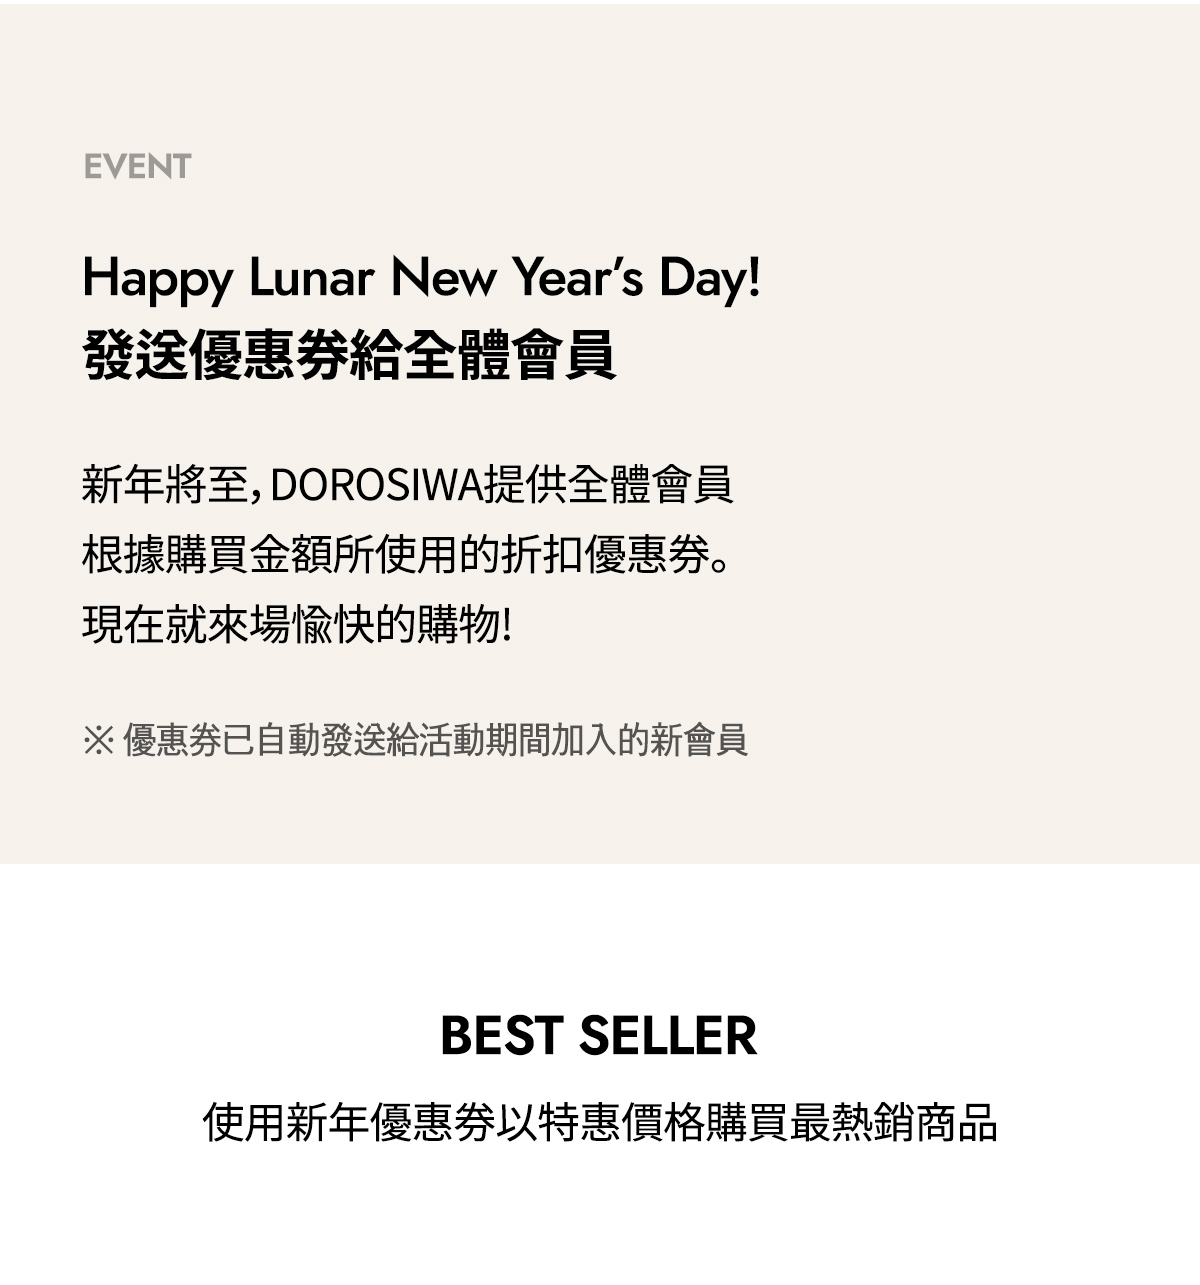 Lunar New Year's day